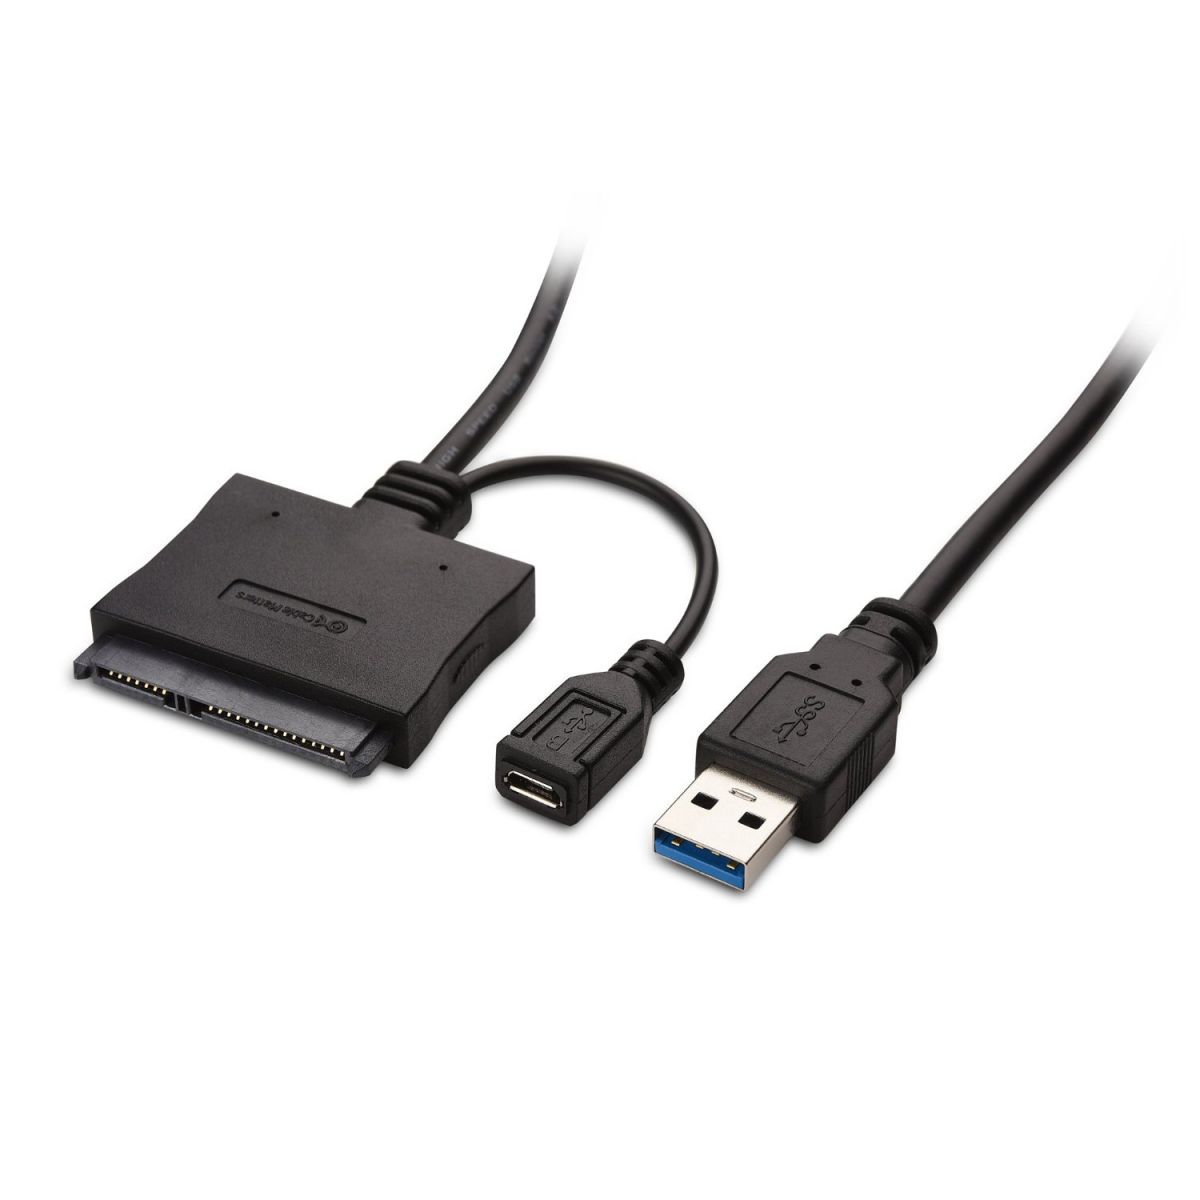 USB 3.0 to SATA III 2.5 SSD/HDD Adapter - Cable Matters Knowledge